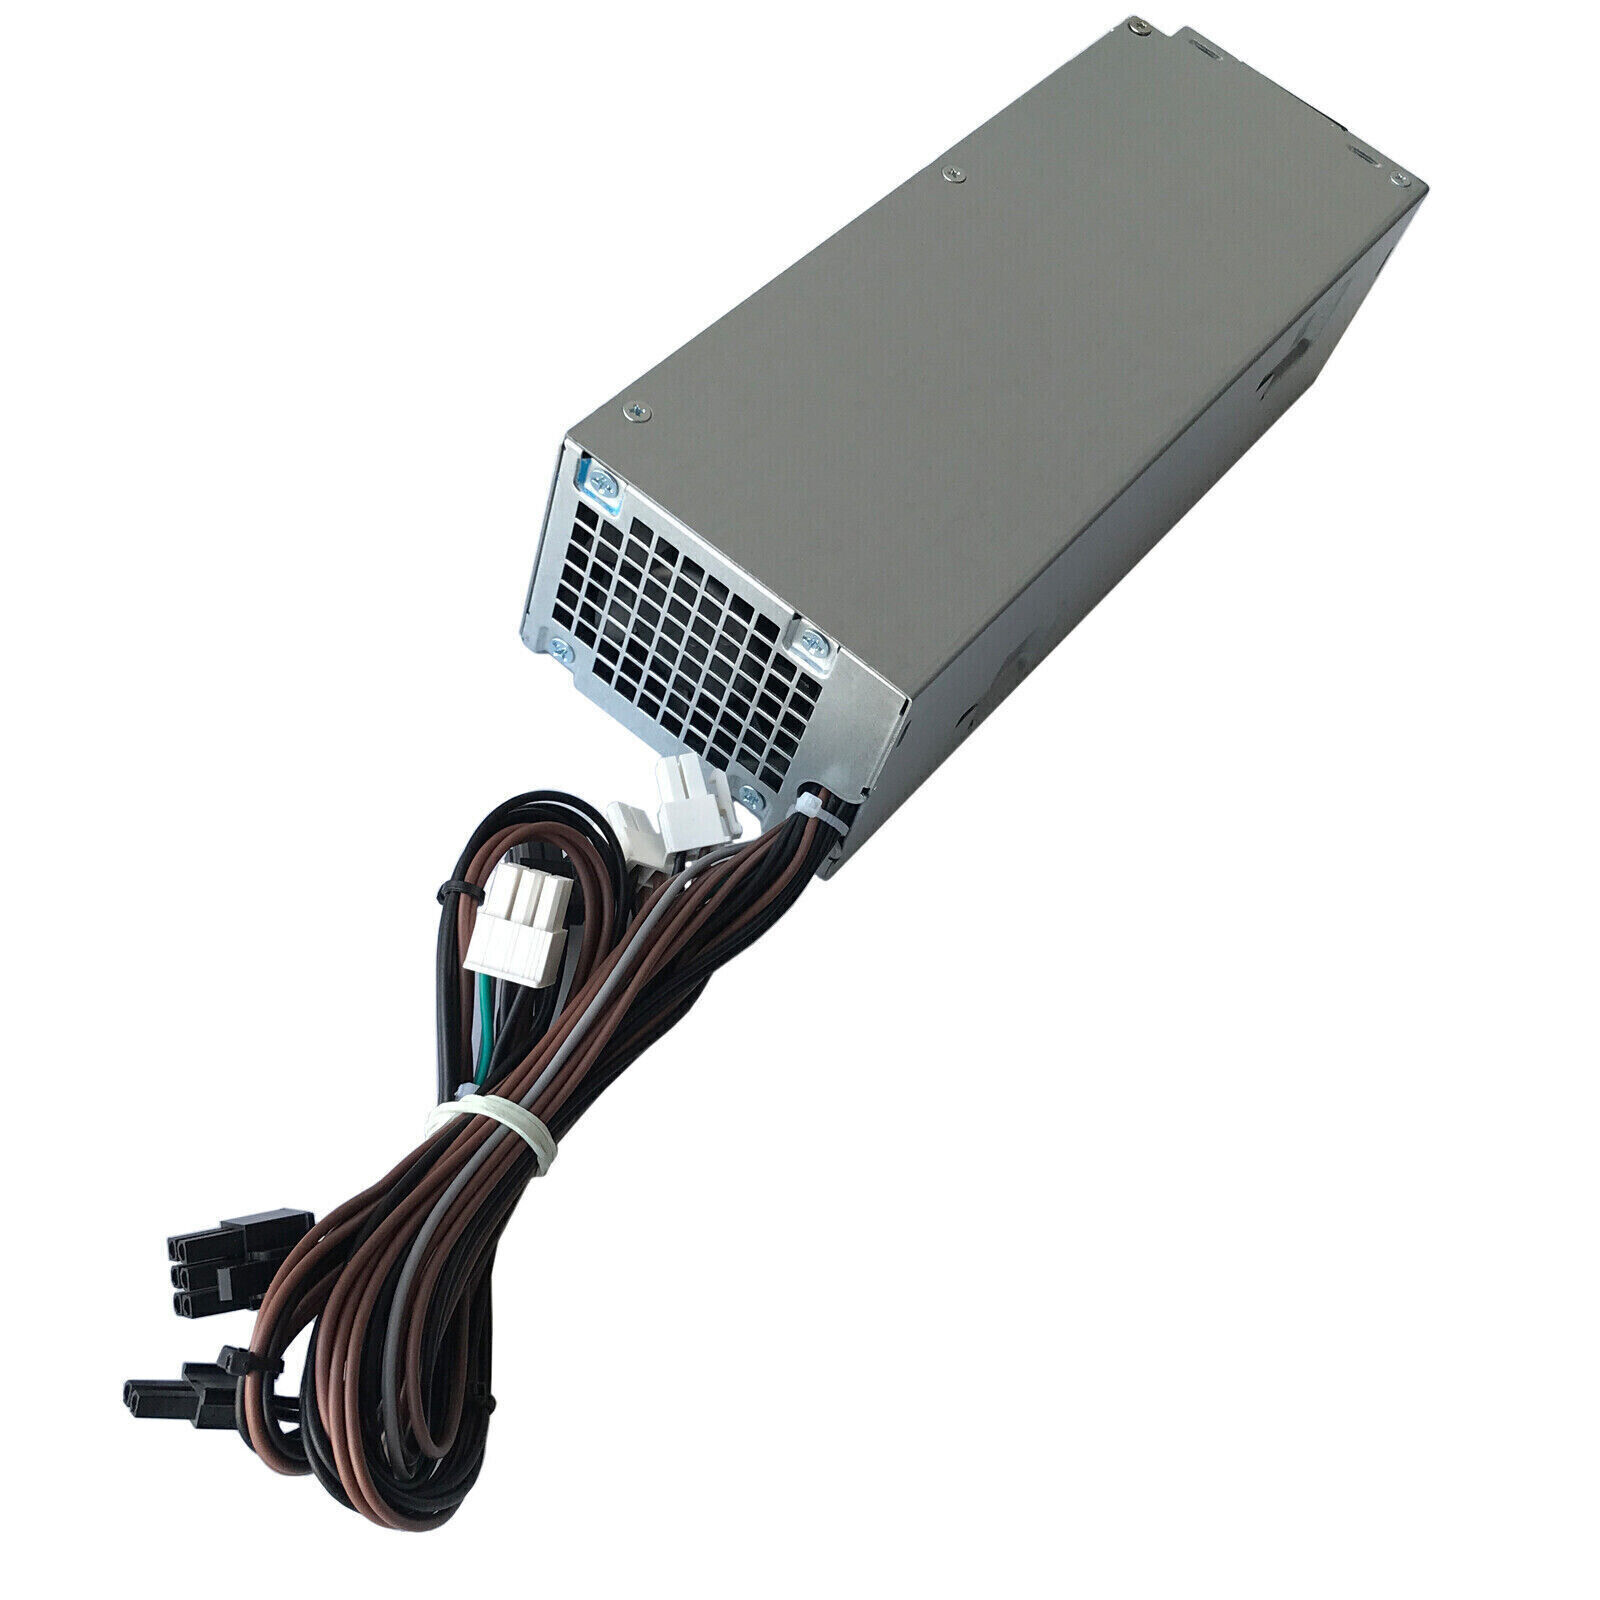 New Power Supply PSU For Dell G5 XPS 8940 7060 7080 5060 G5-5090 500W D500EPM-00